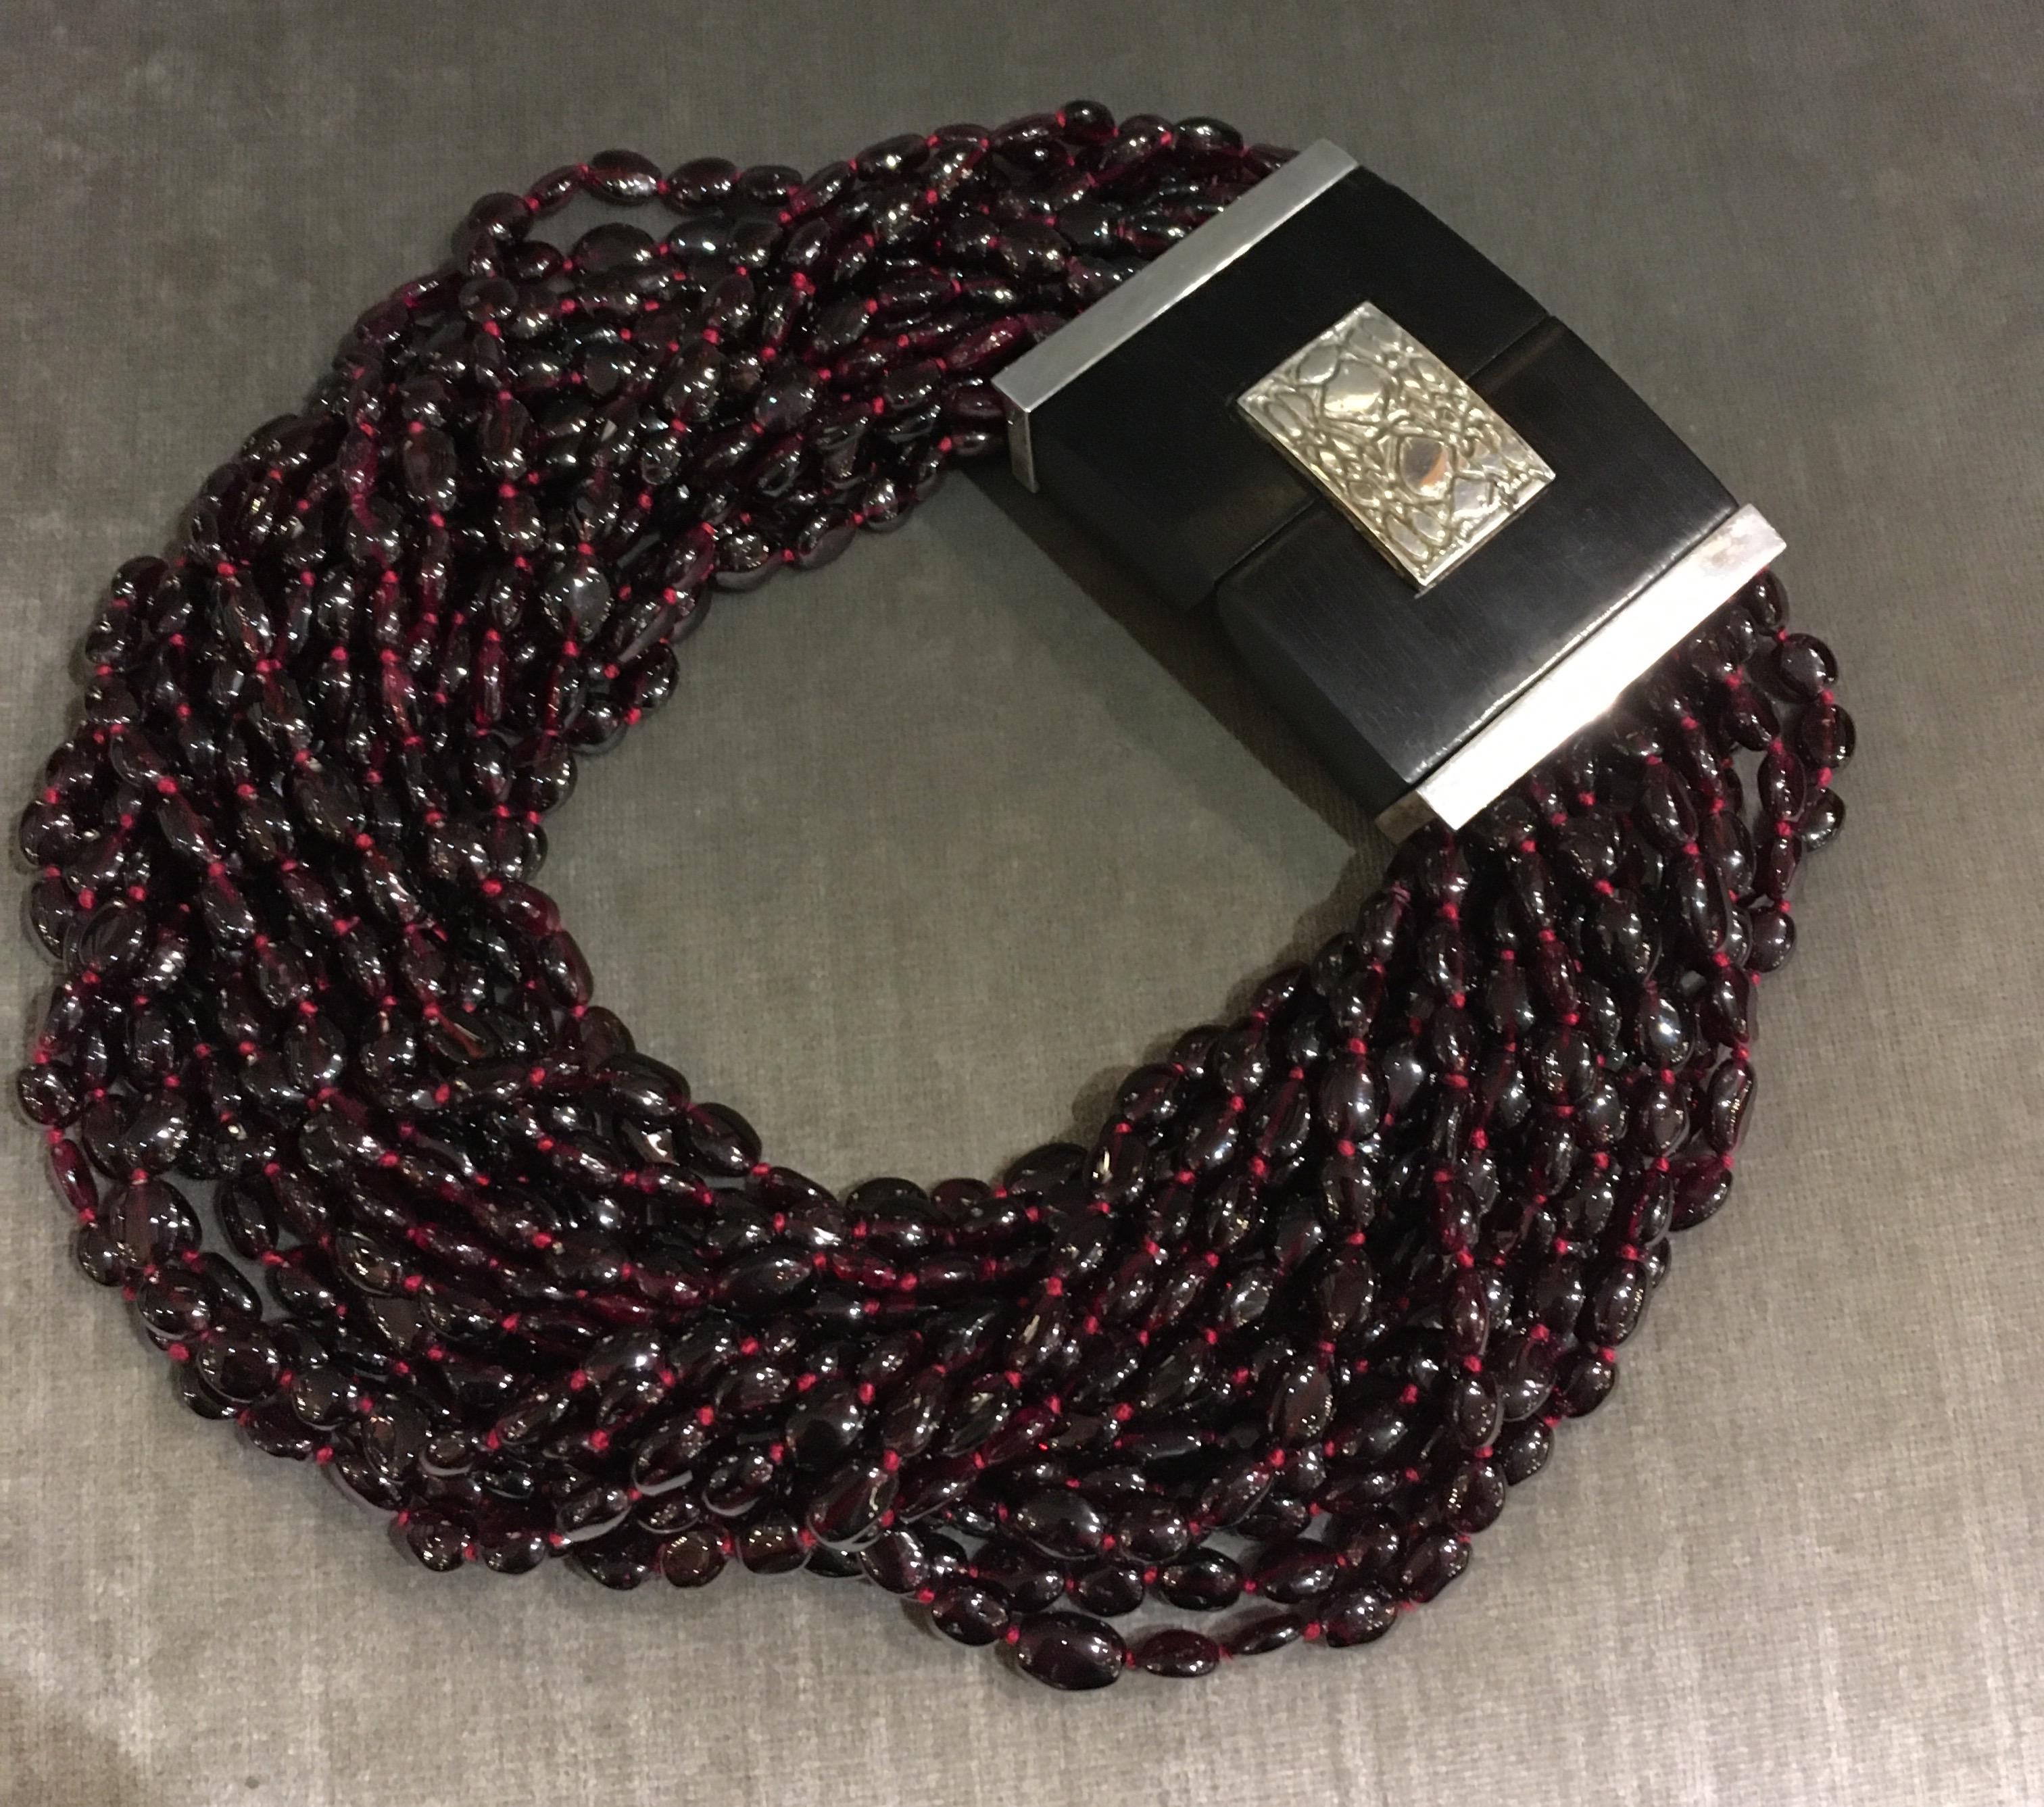 Hand strung garnet beads on silk thread with large decorative ebony and sterling clasp. Artist signature on clasp. Can be worn straight so it sits lower on neck, or beads can be twisted so it sits higher on the neck. Looks beautiful either way.